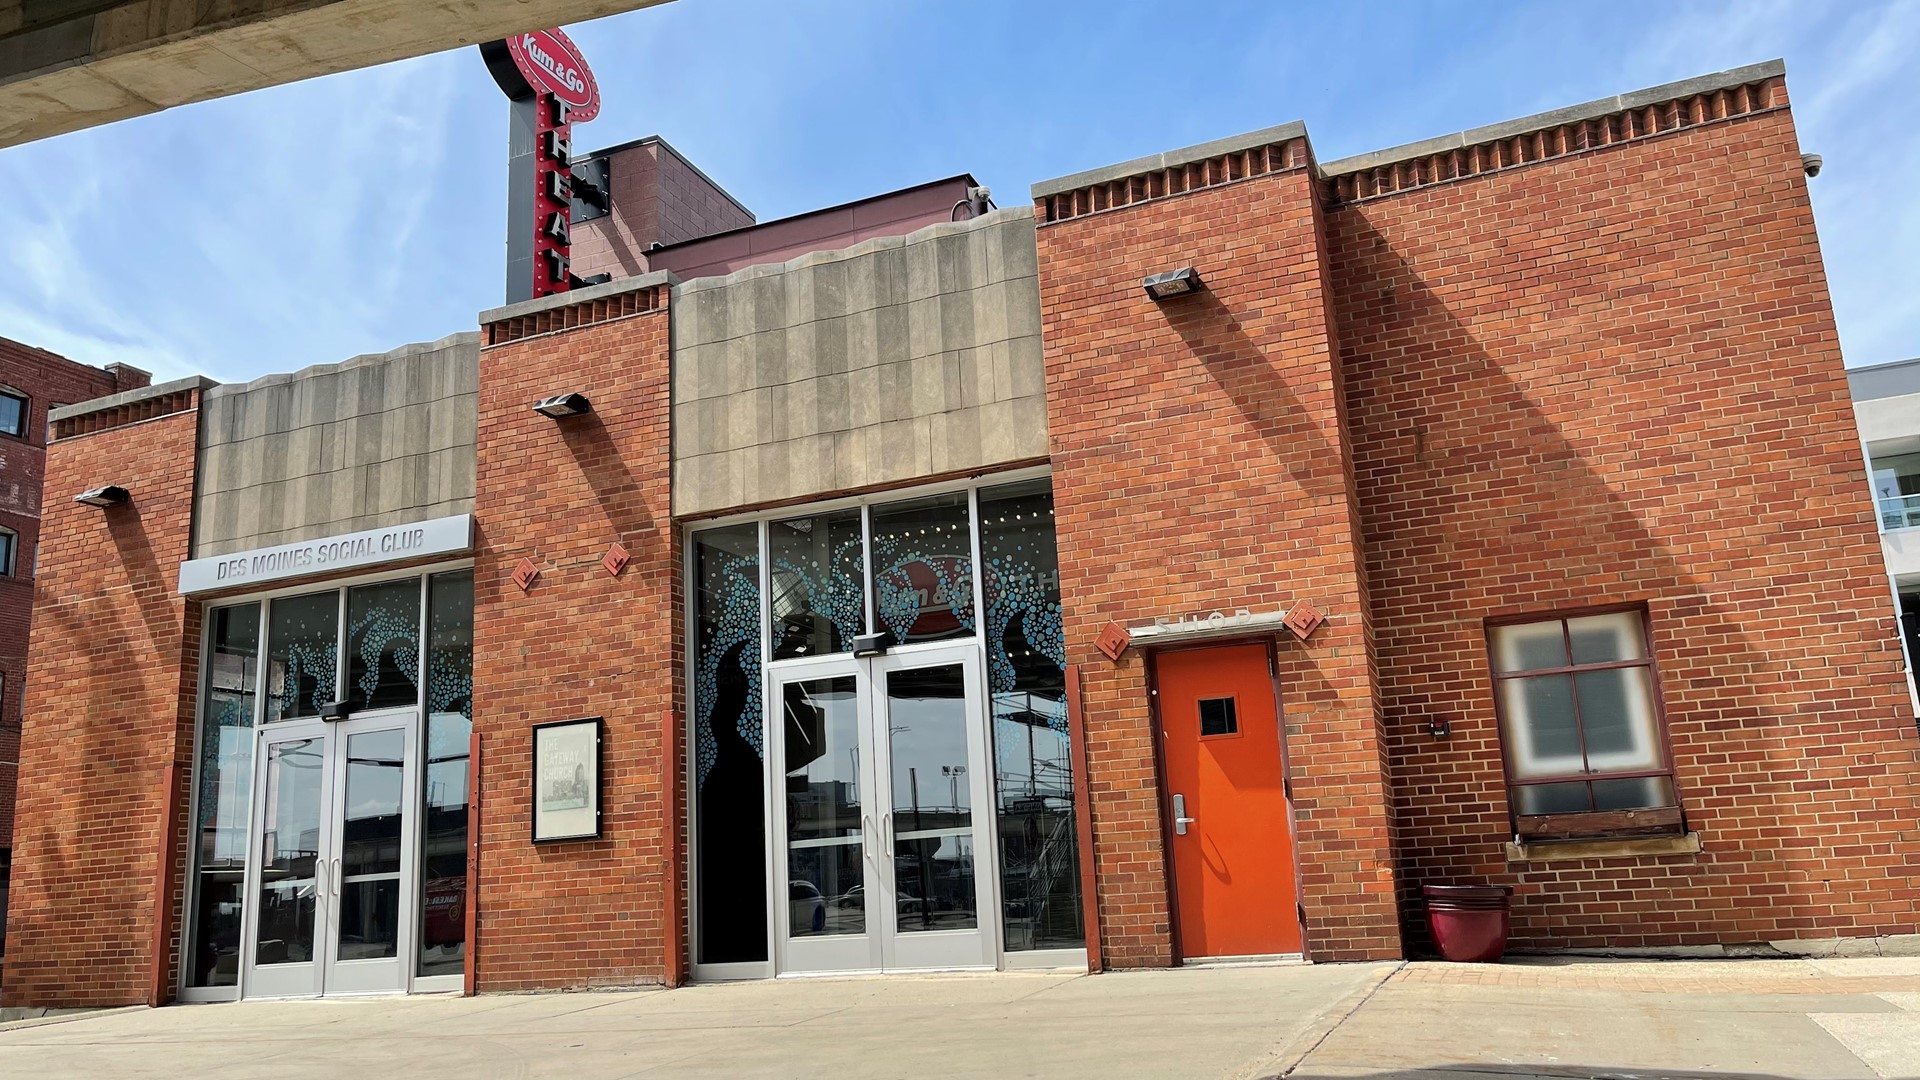 A new buyer is reimagining the Des Moines Social Club.